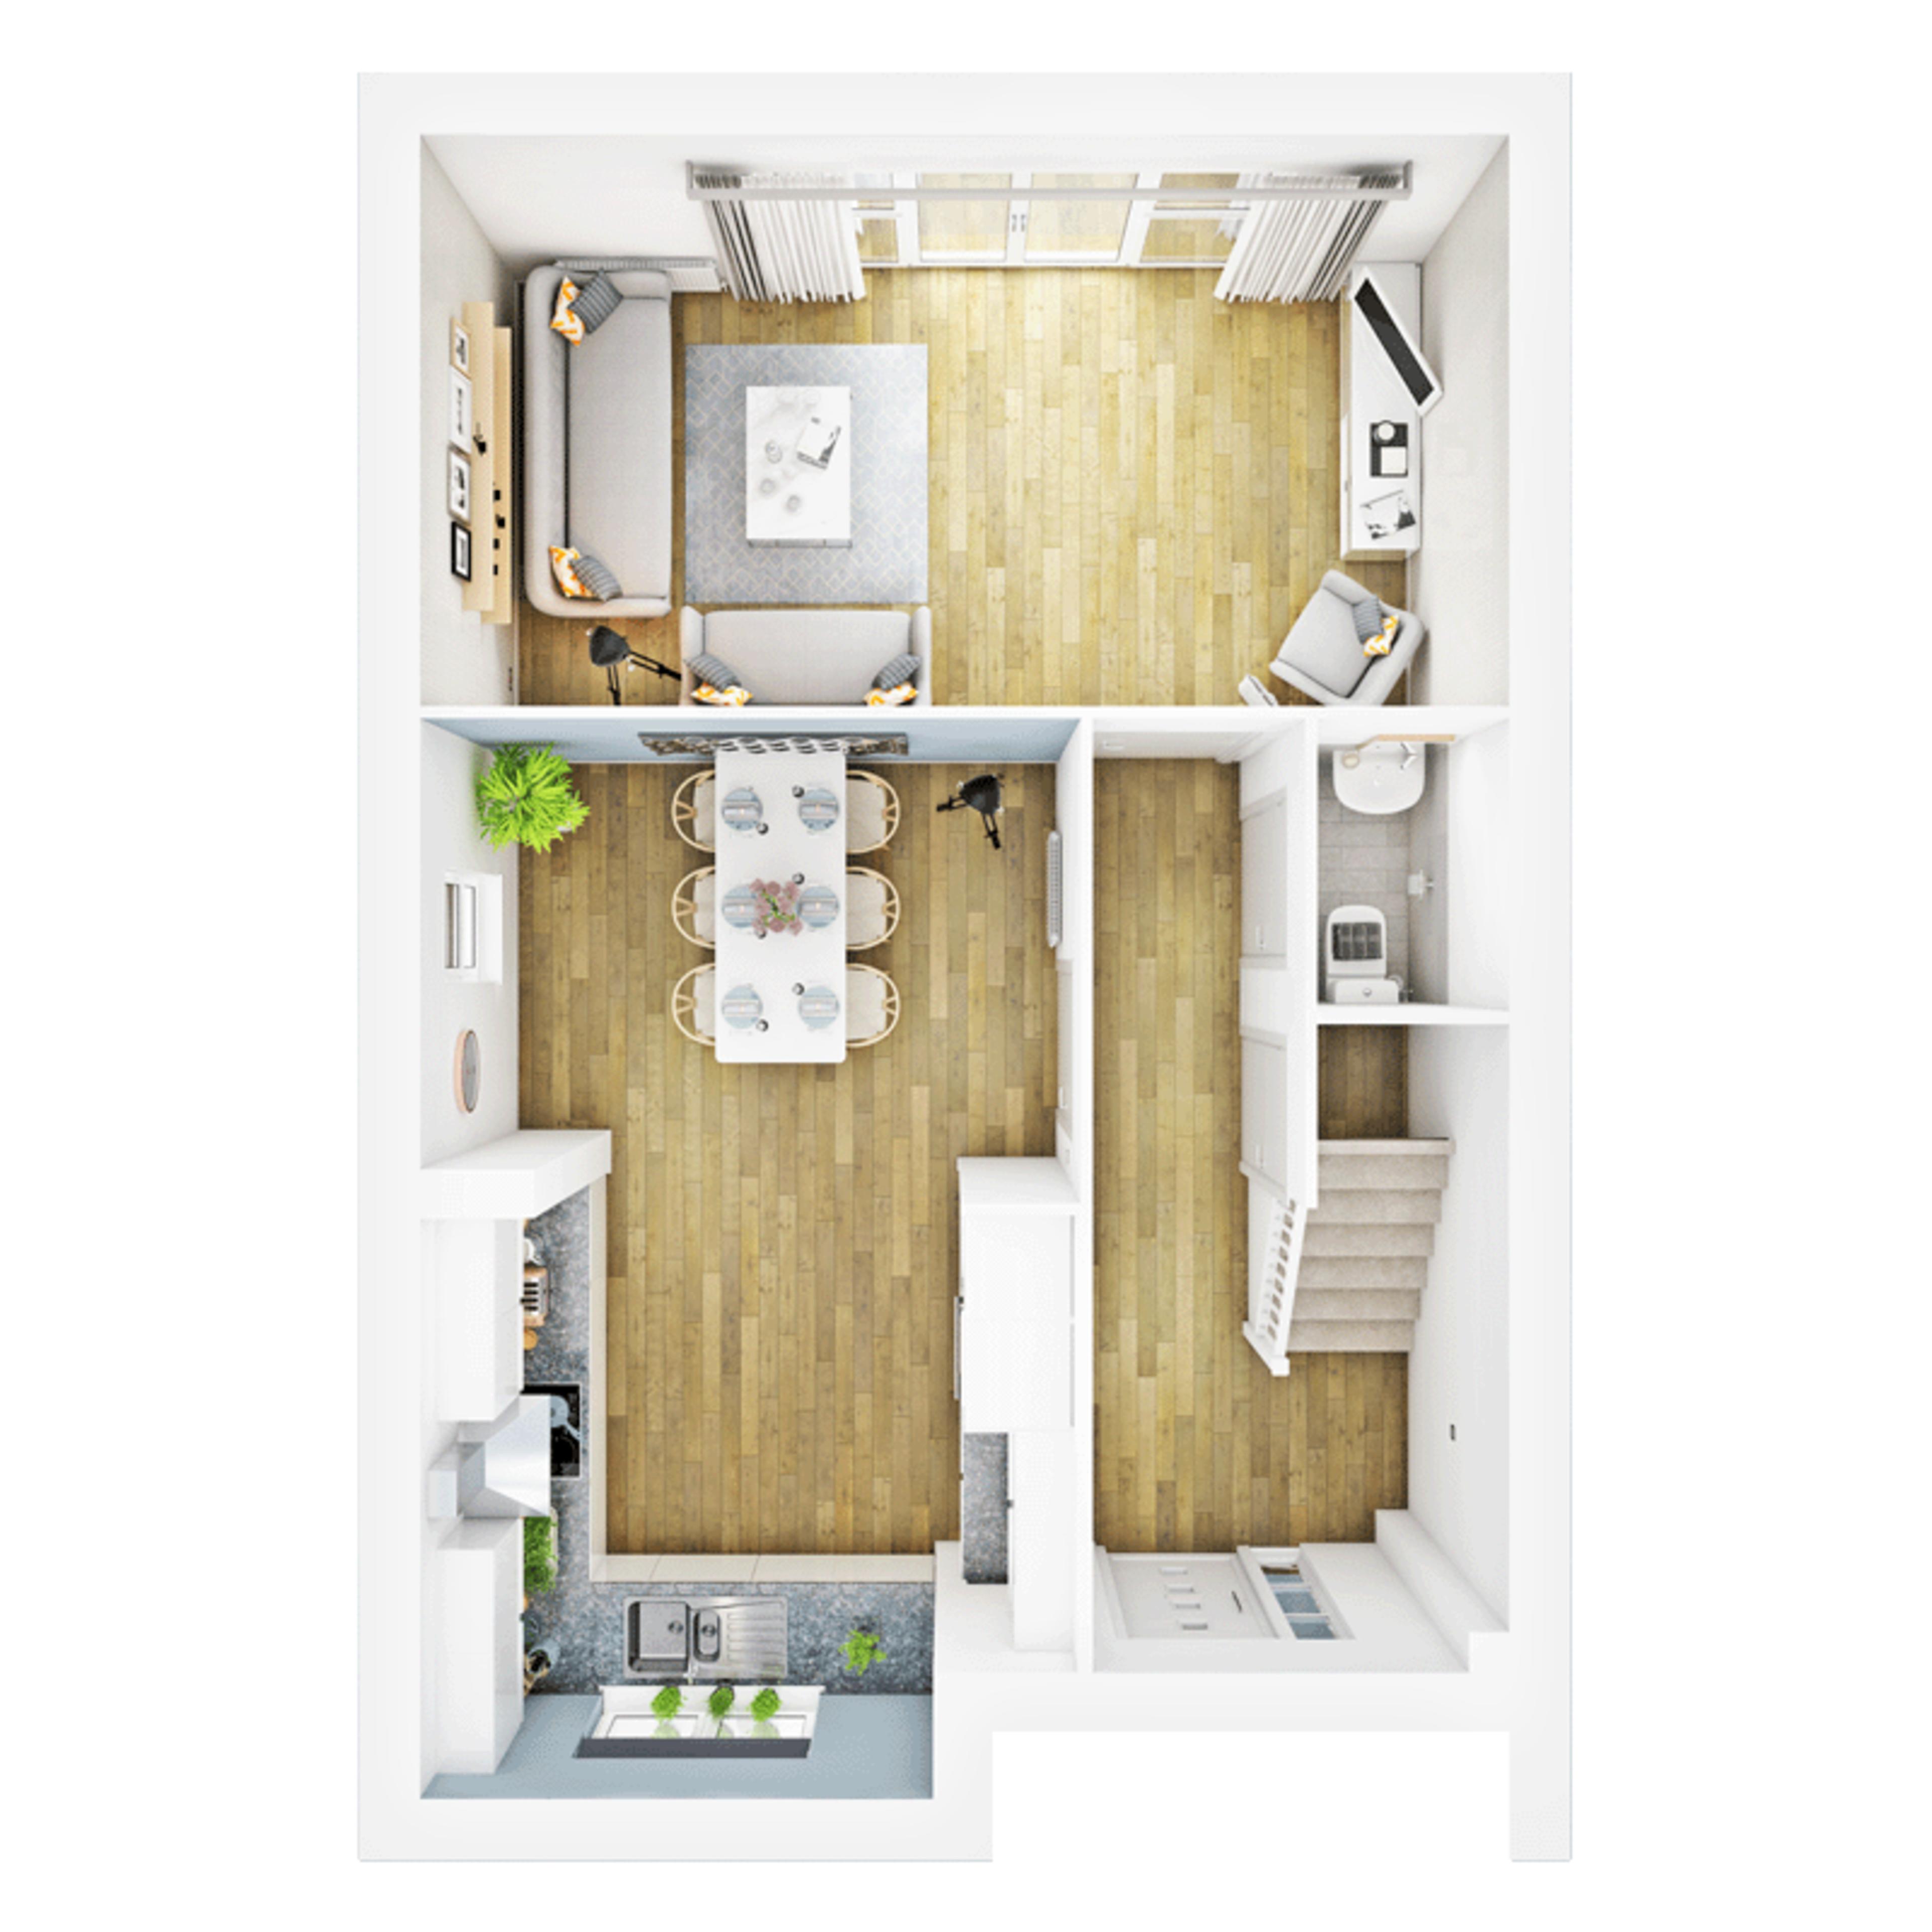 meaux-rise-kingswood-hull-new-persona-homes-beat-ground-floor-plan